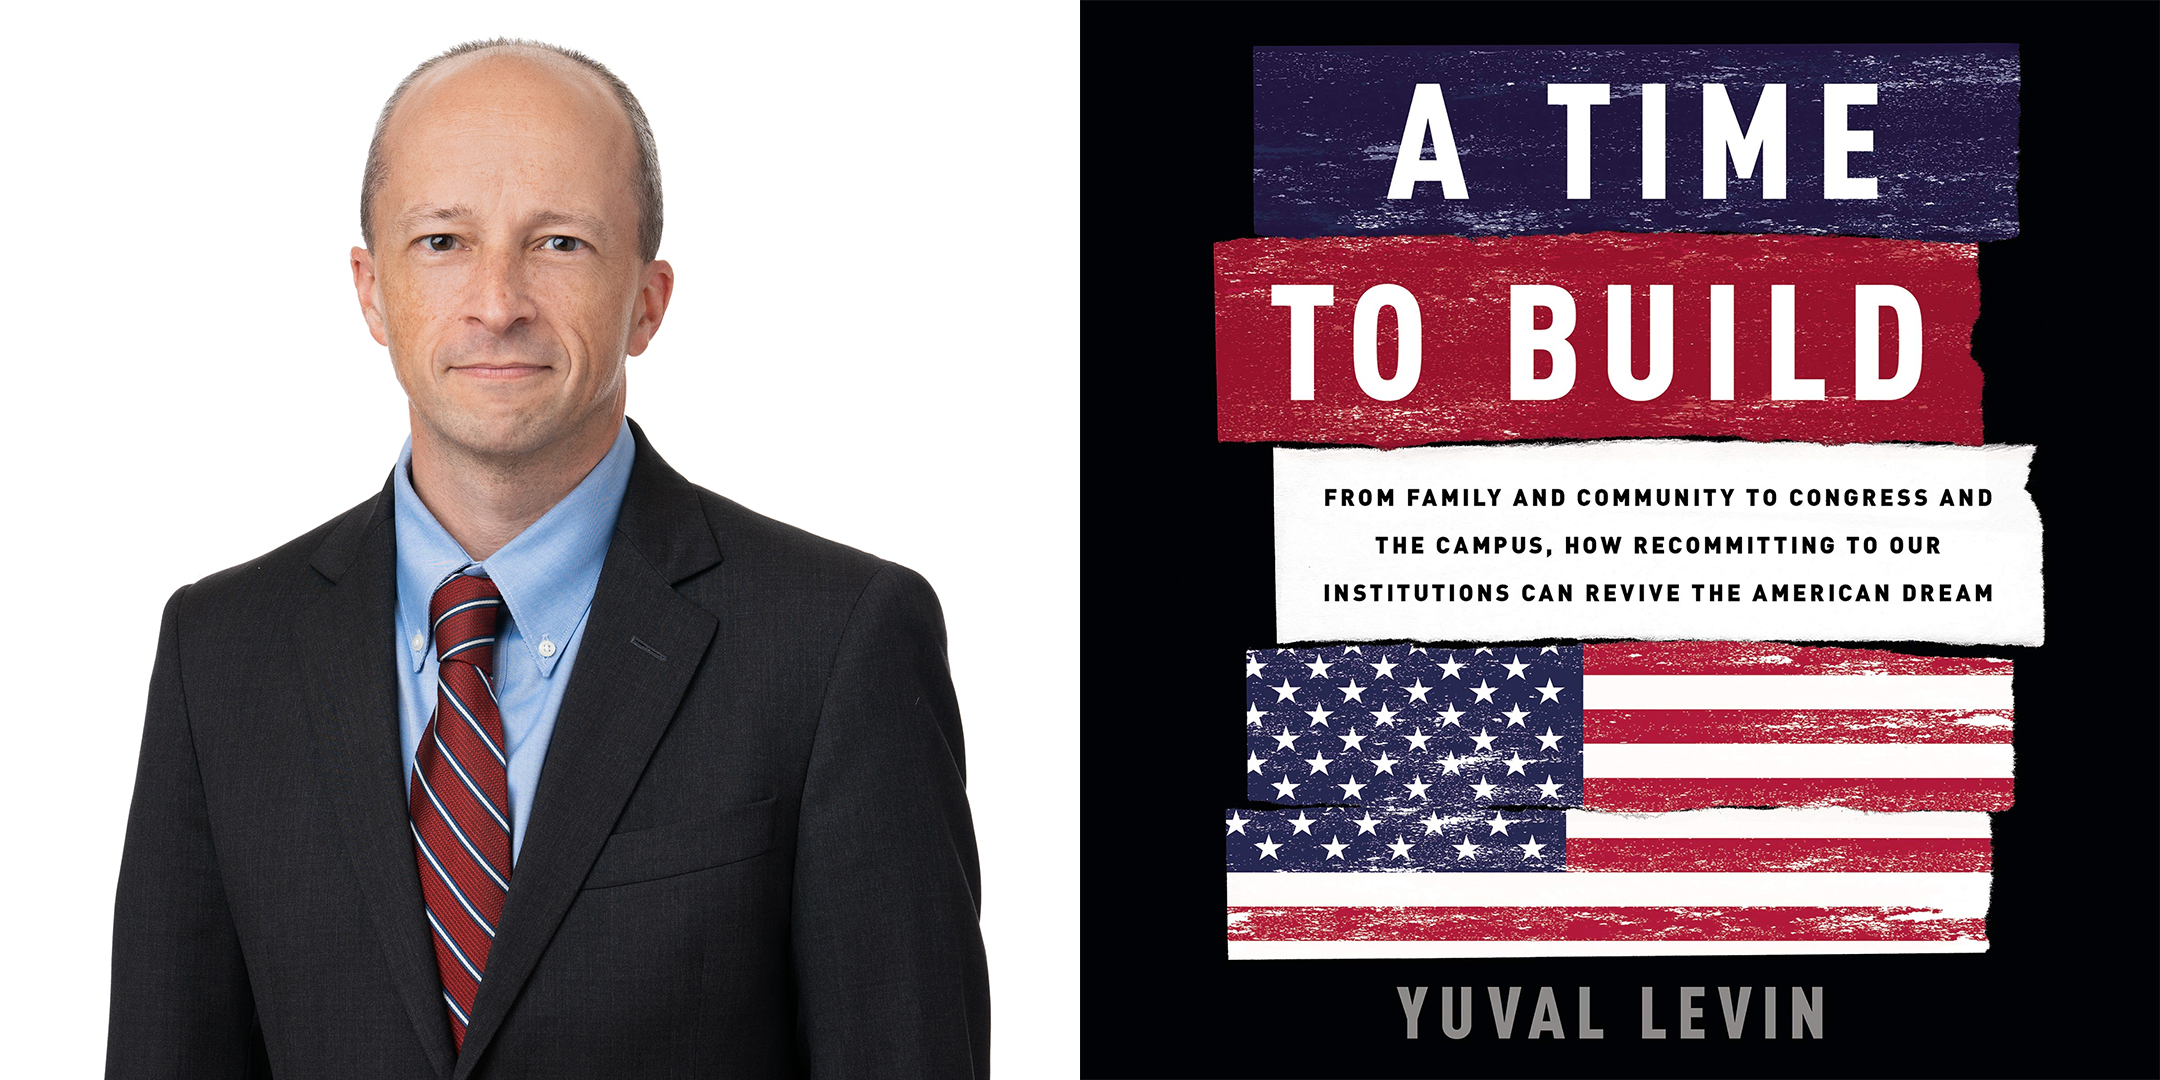 Profile photo of Yuval Levin on the left, cover of the book A Time to Build on the right